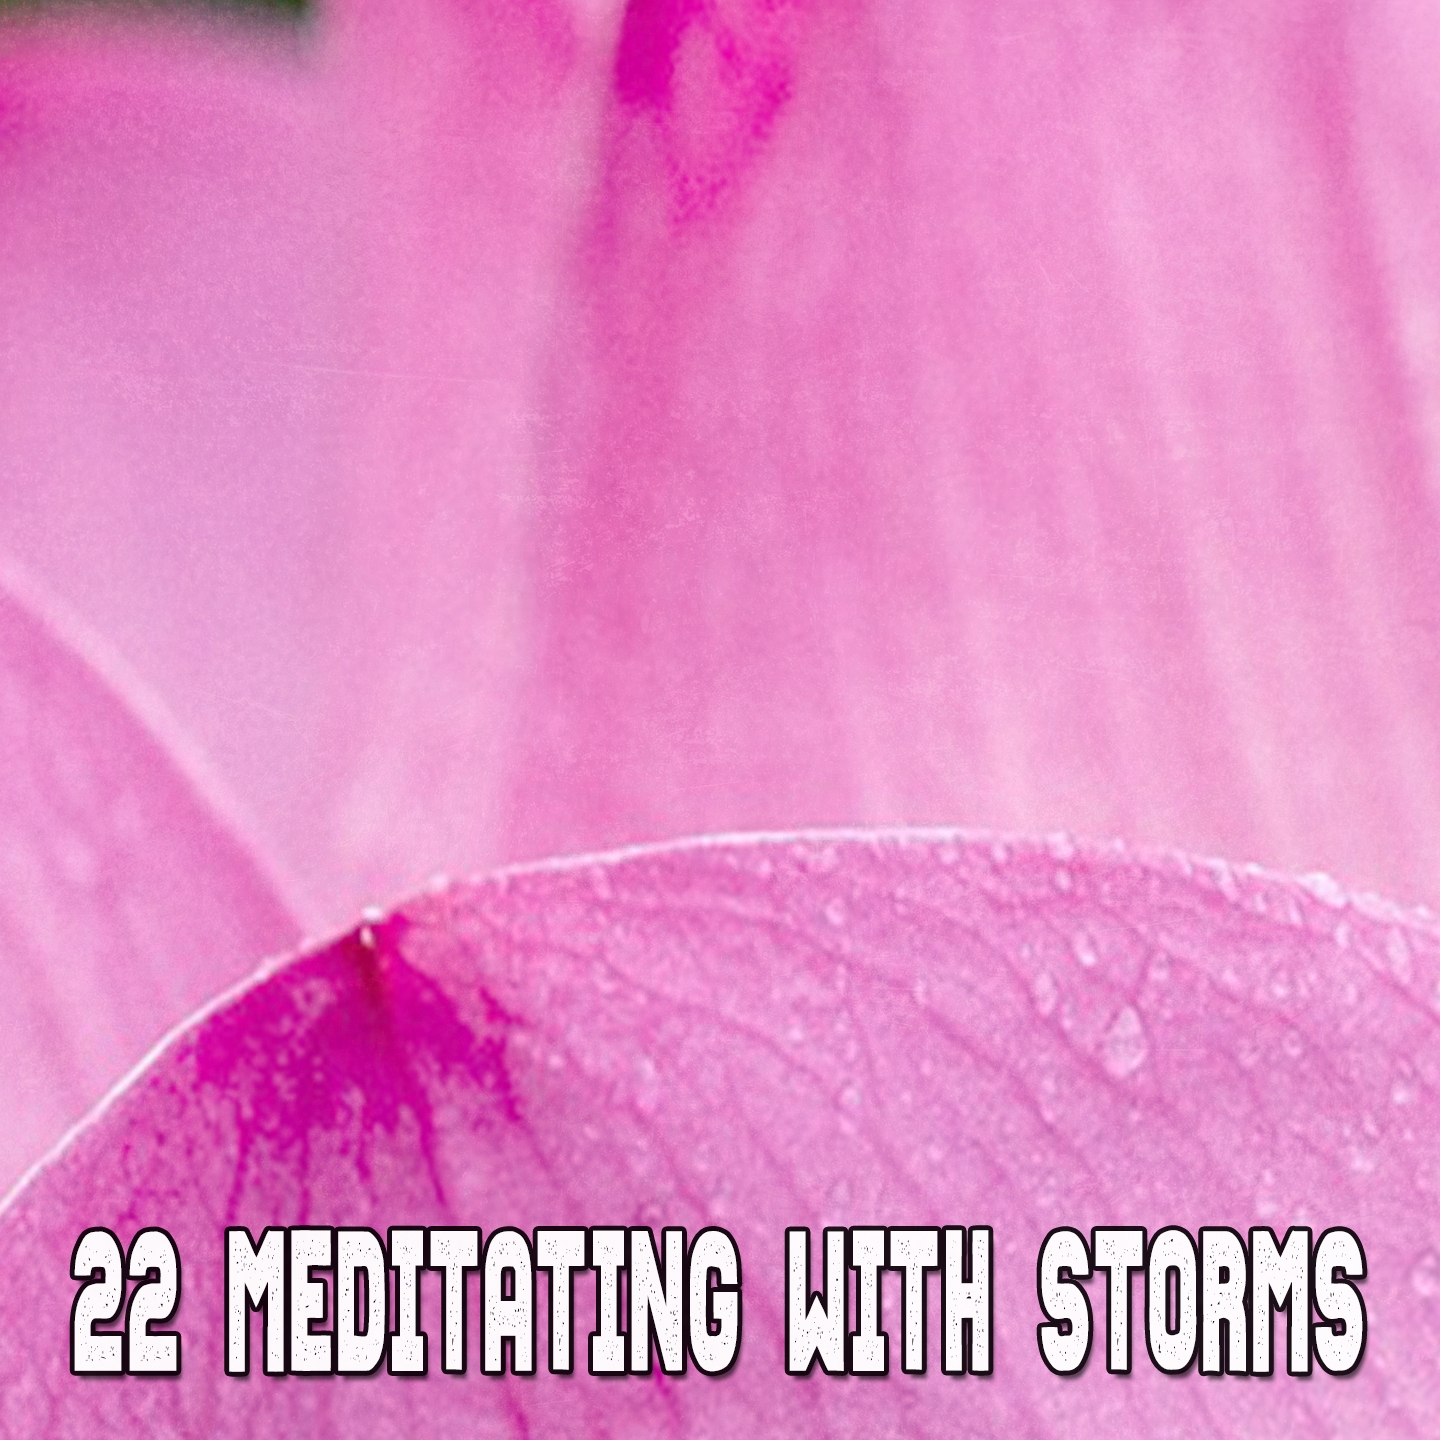 22 Meditating With Storms